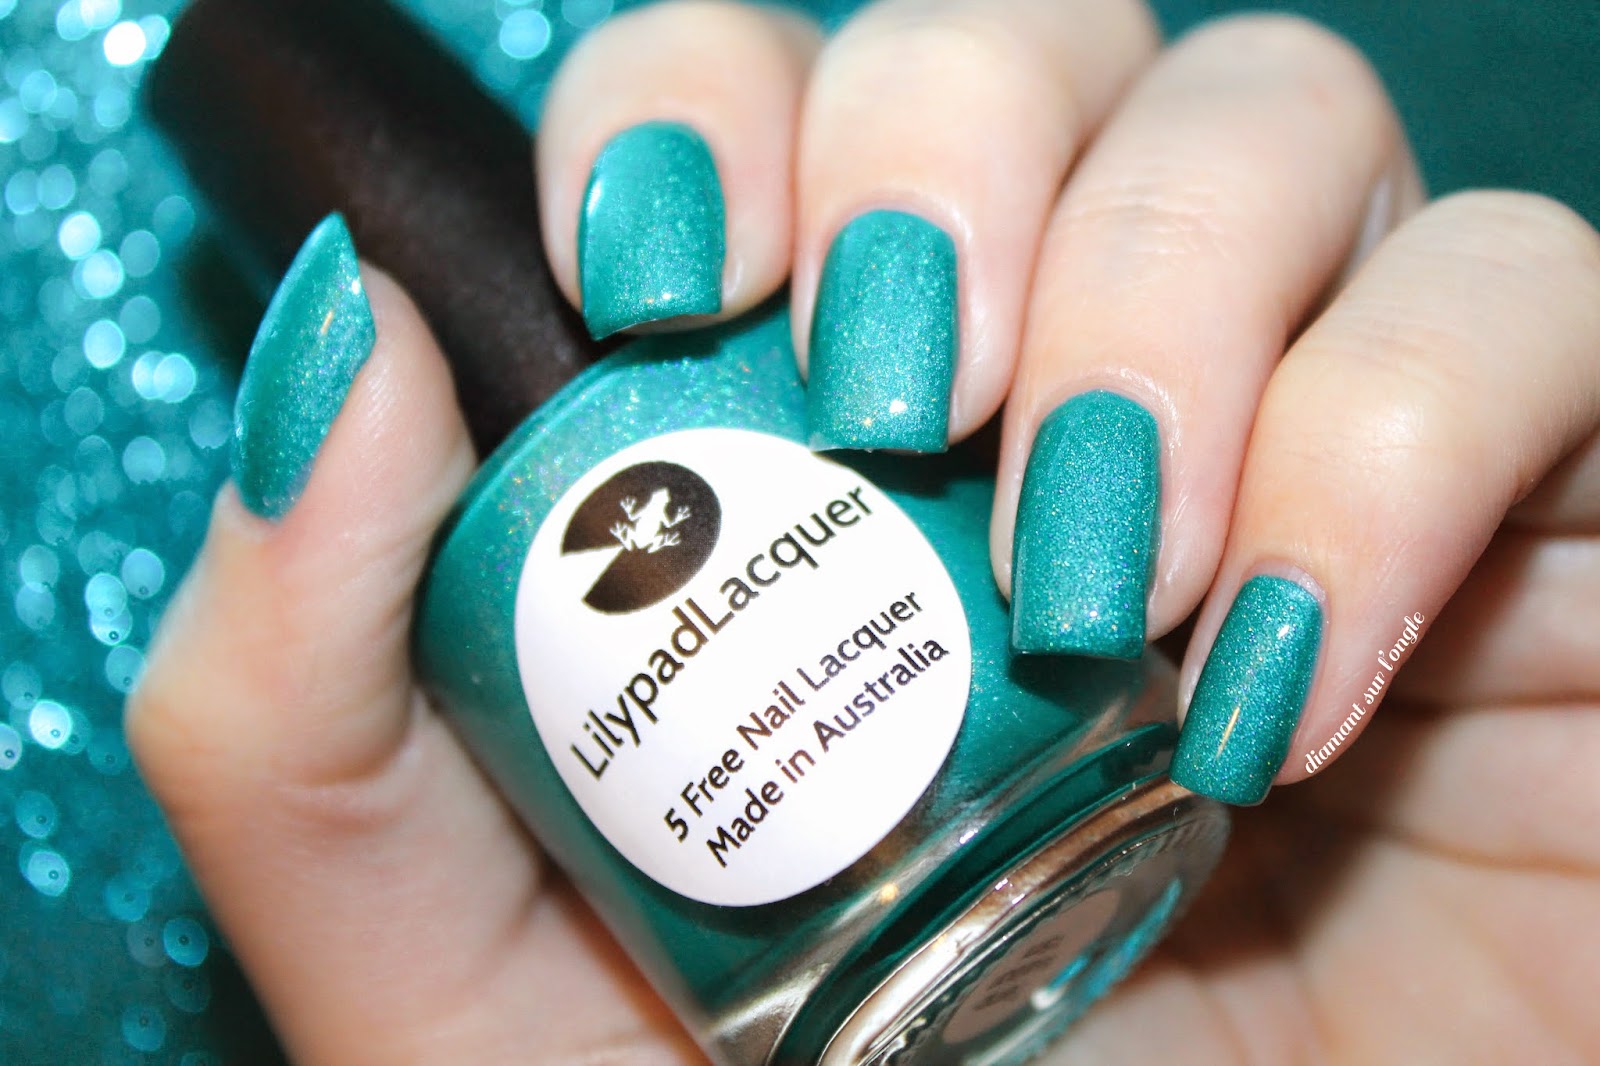 Swatch of Temp-tealtion from Lilypad Lacquer